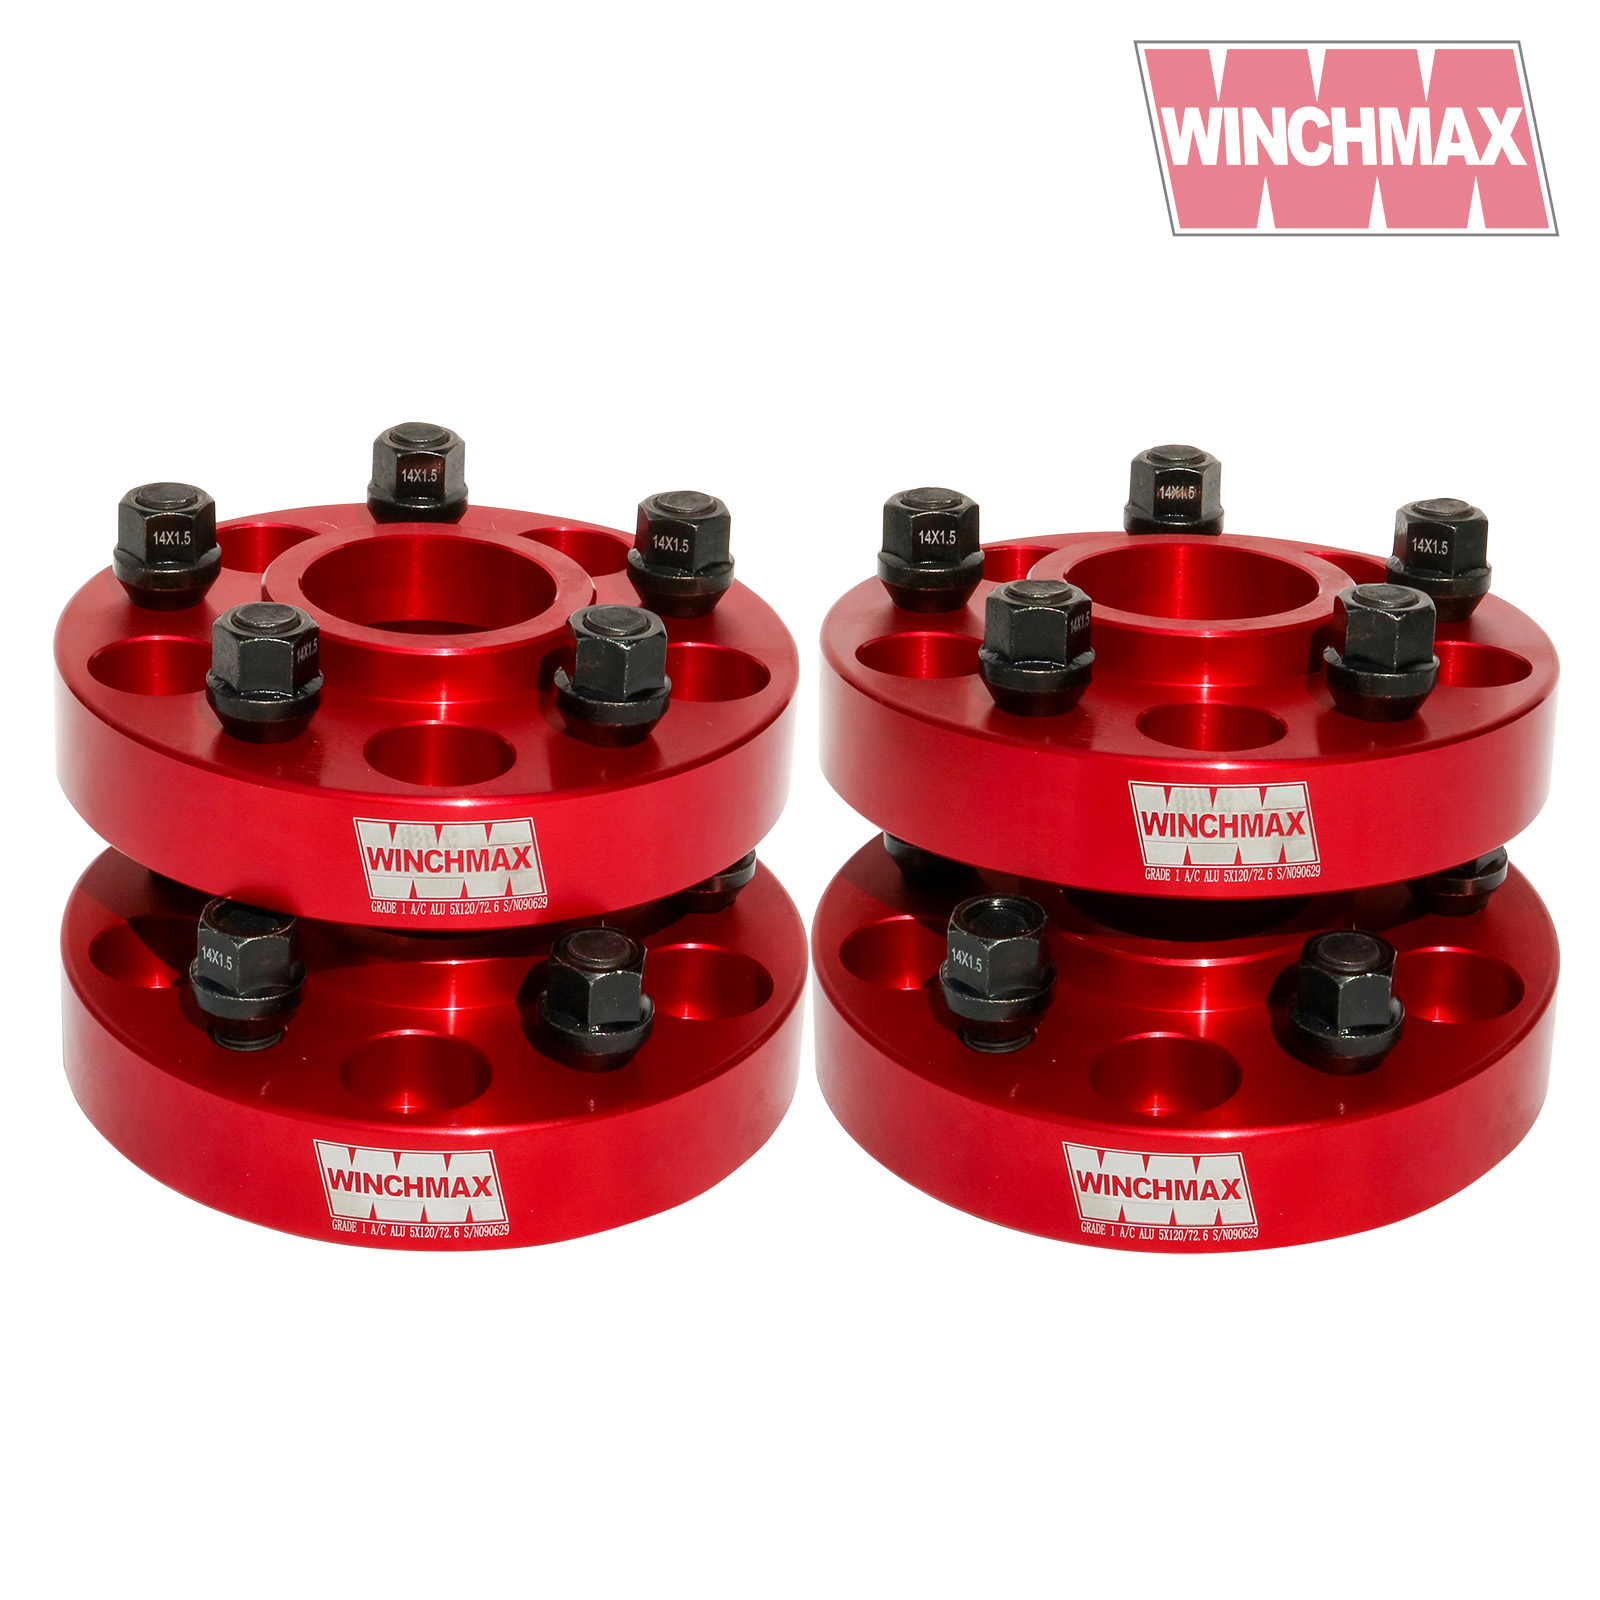 WINCHMAX 30mm Wheel Spacer T3